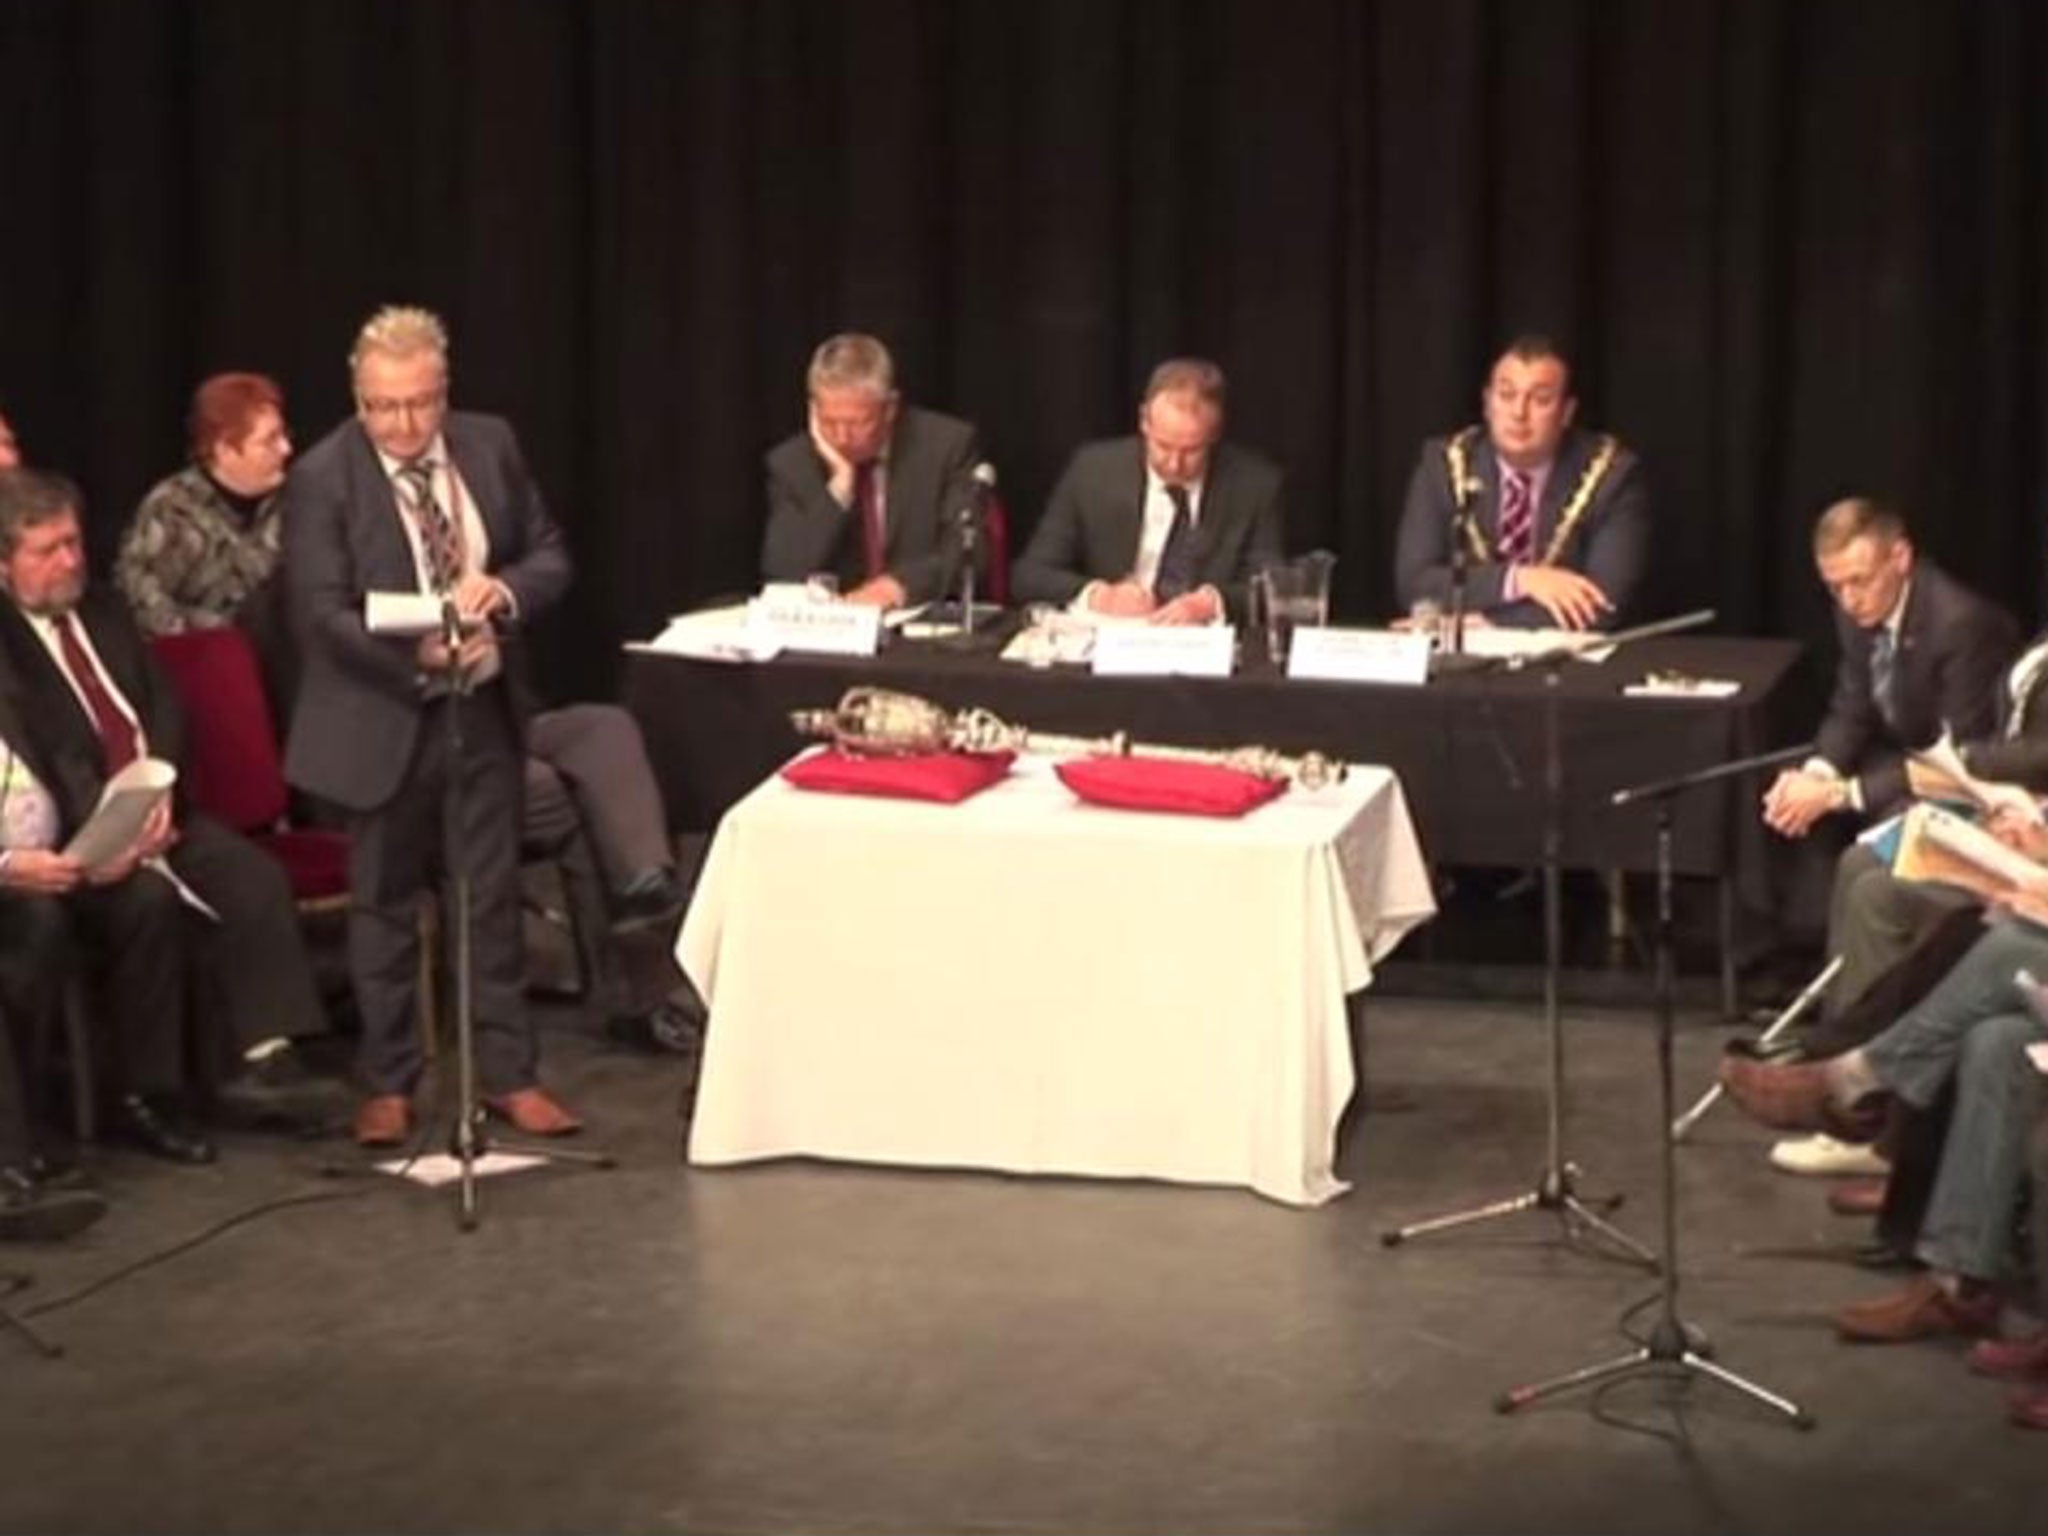 The Council meeting where the alleged comments were made